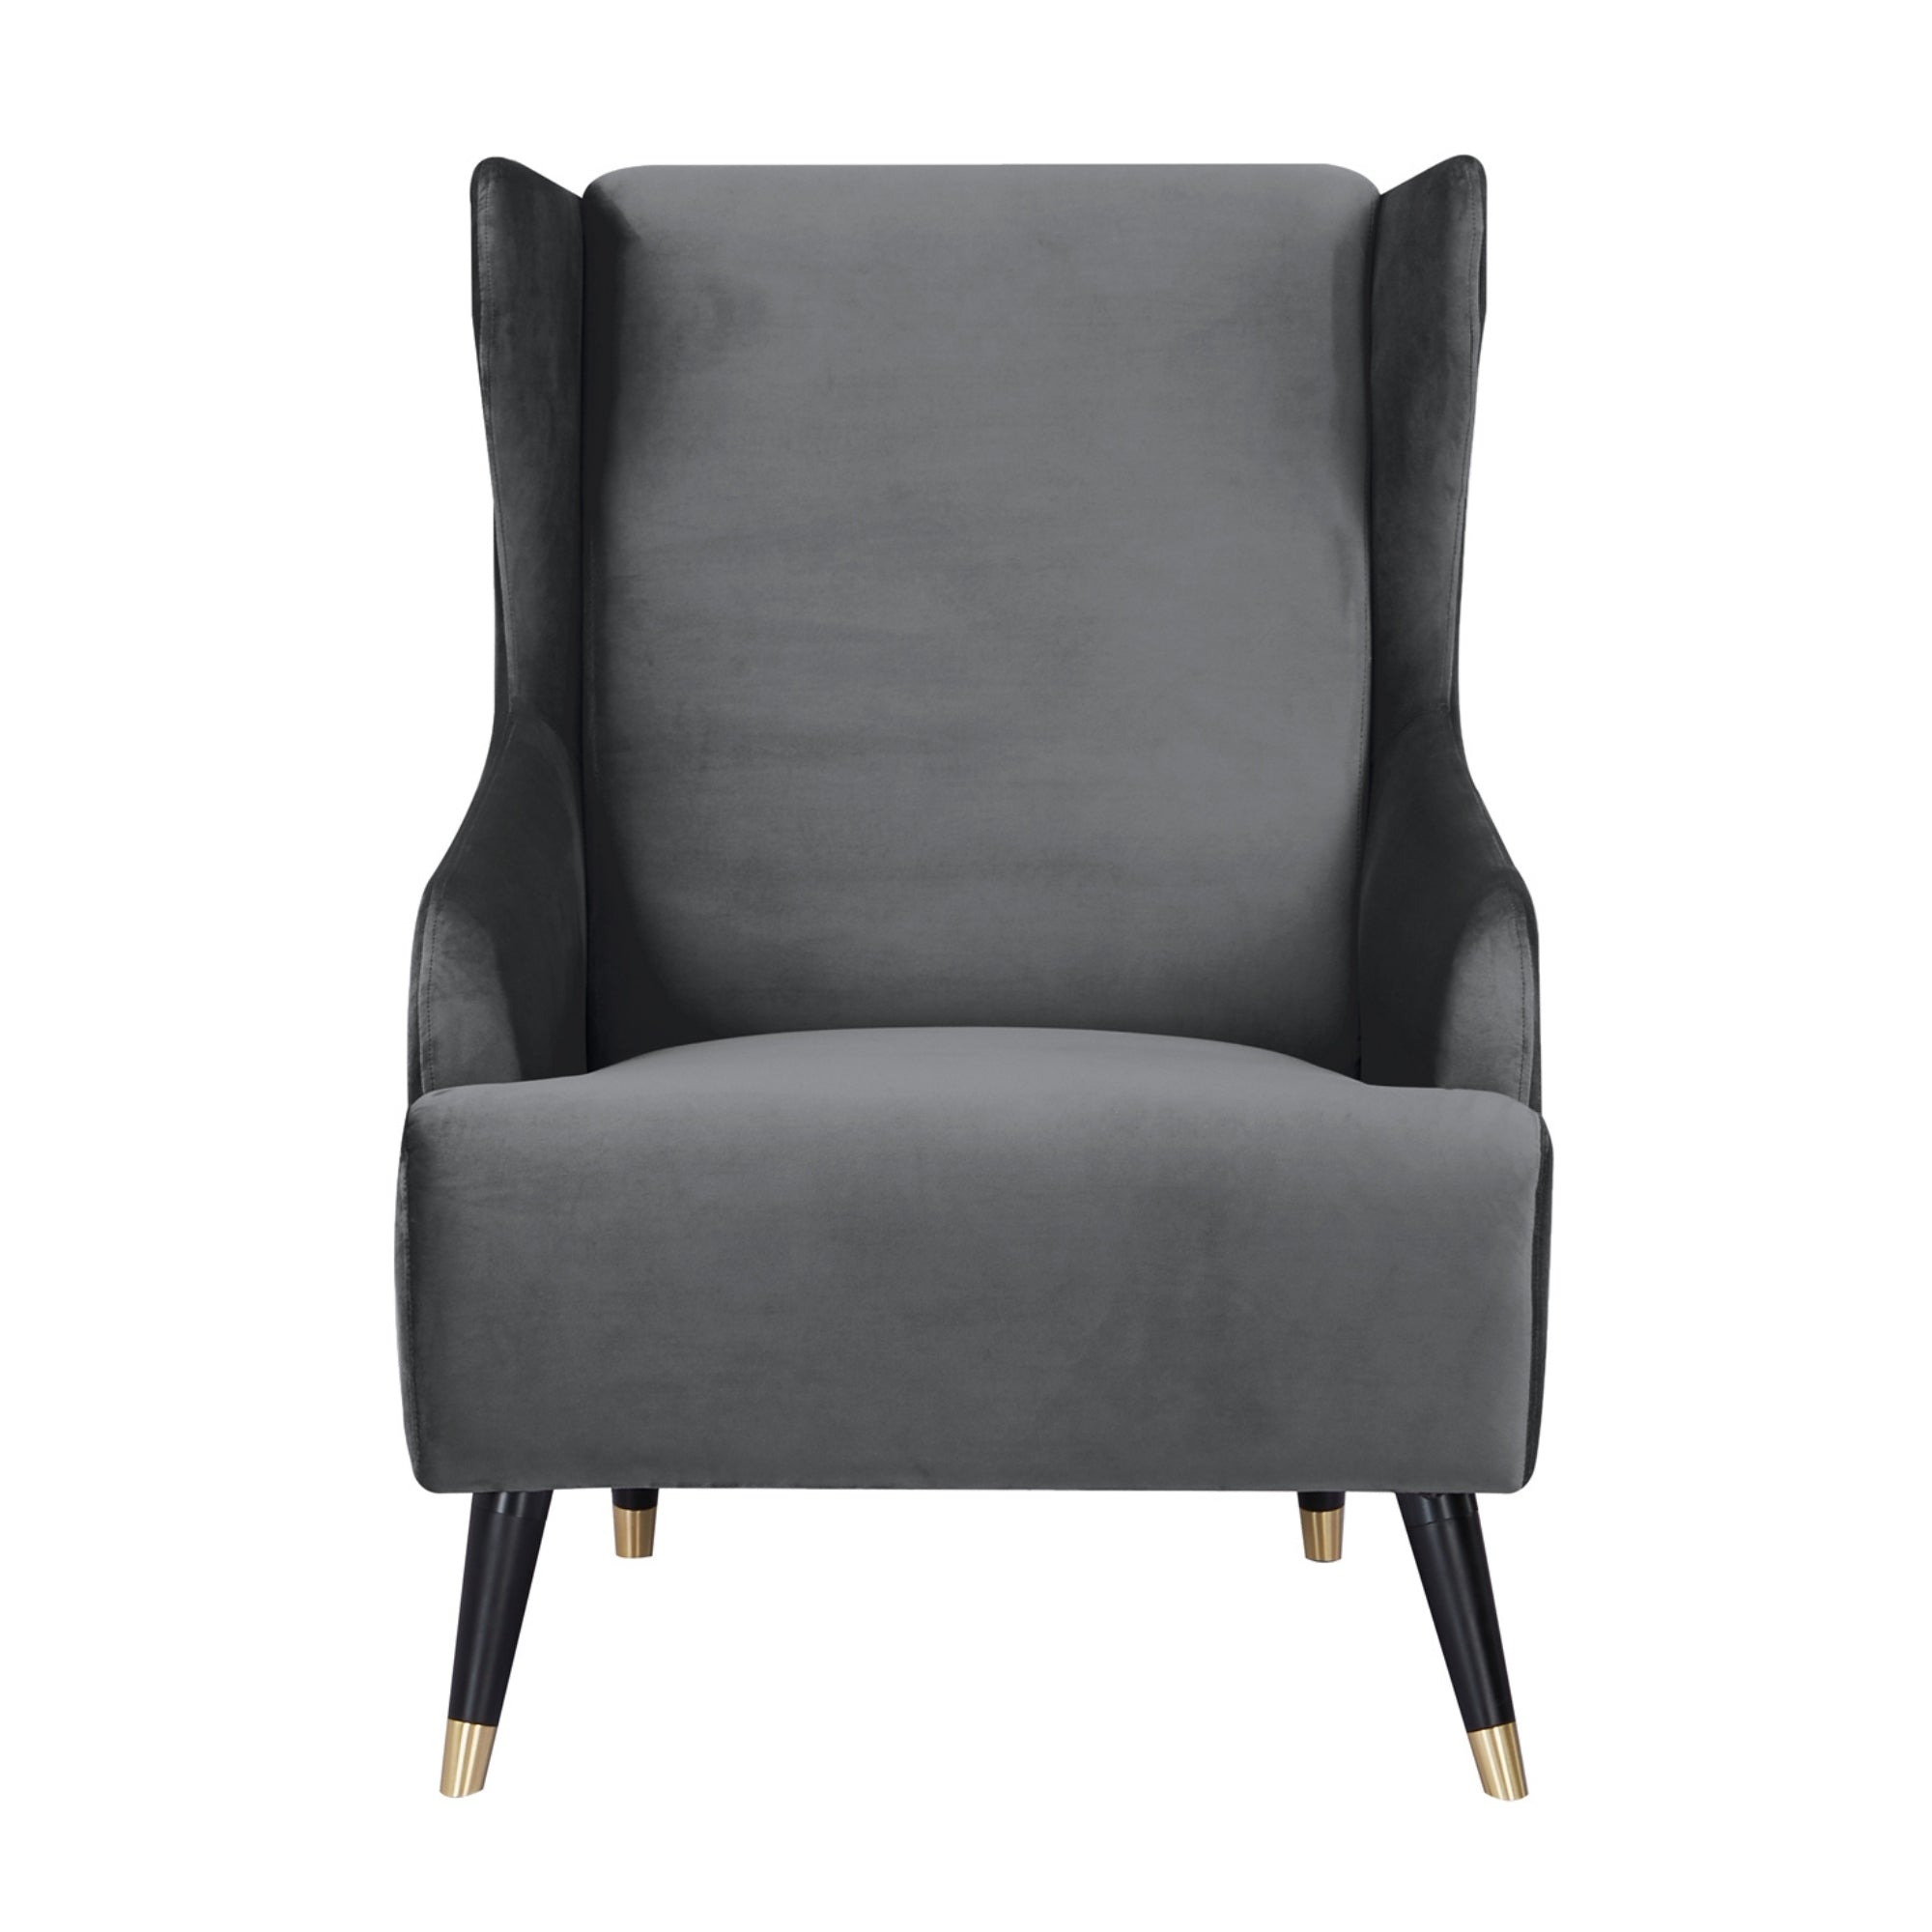 Grey Scandinavian Fabric Upholstered Accent Chair - Sylvia